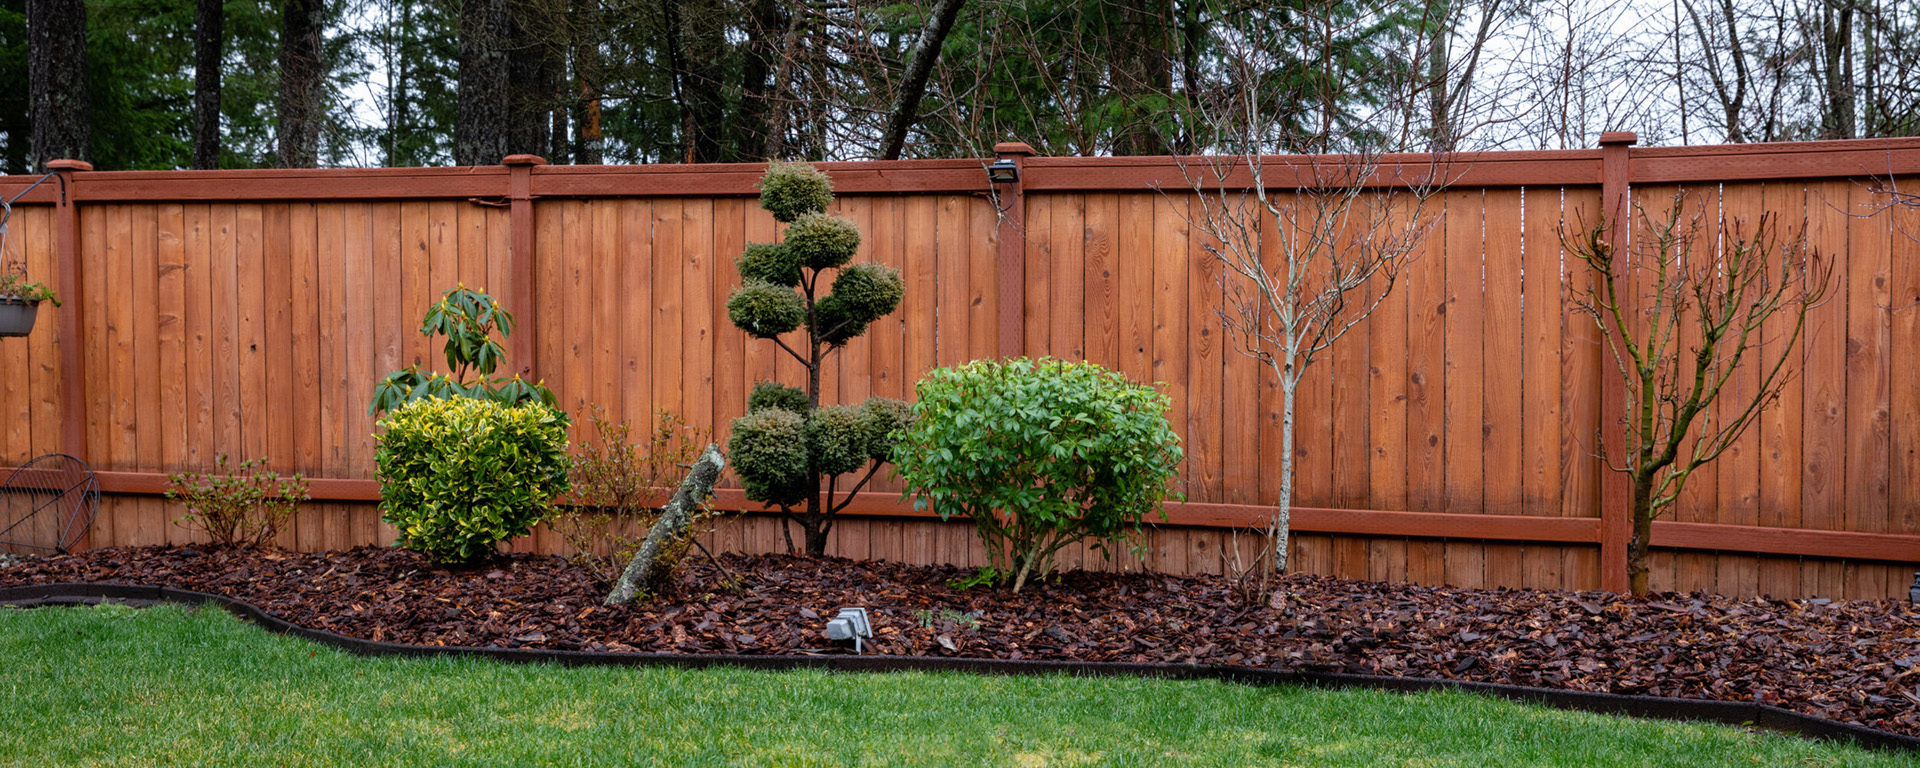 Picture of tall wooden fence and landscaped yard. 